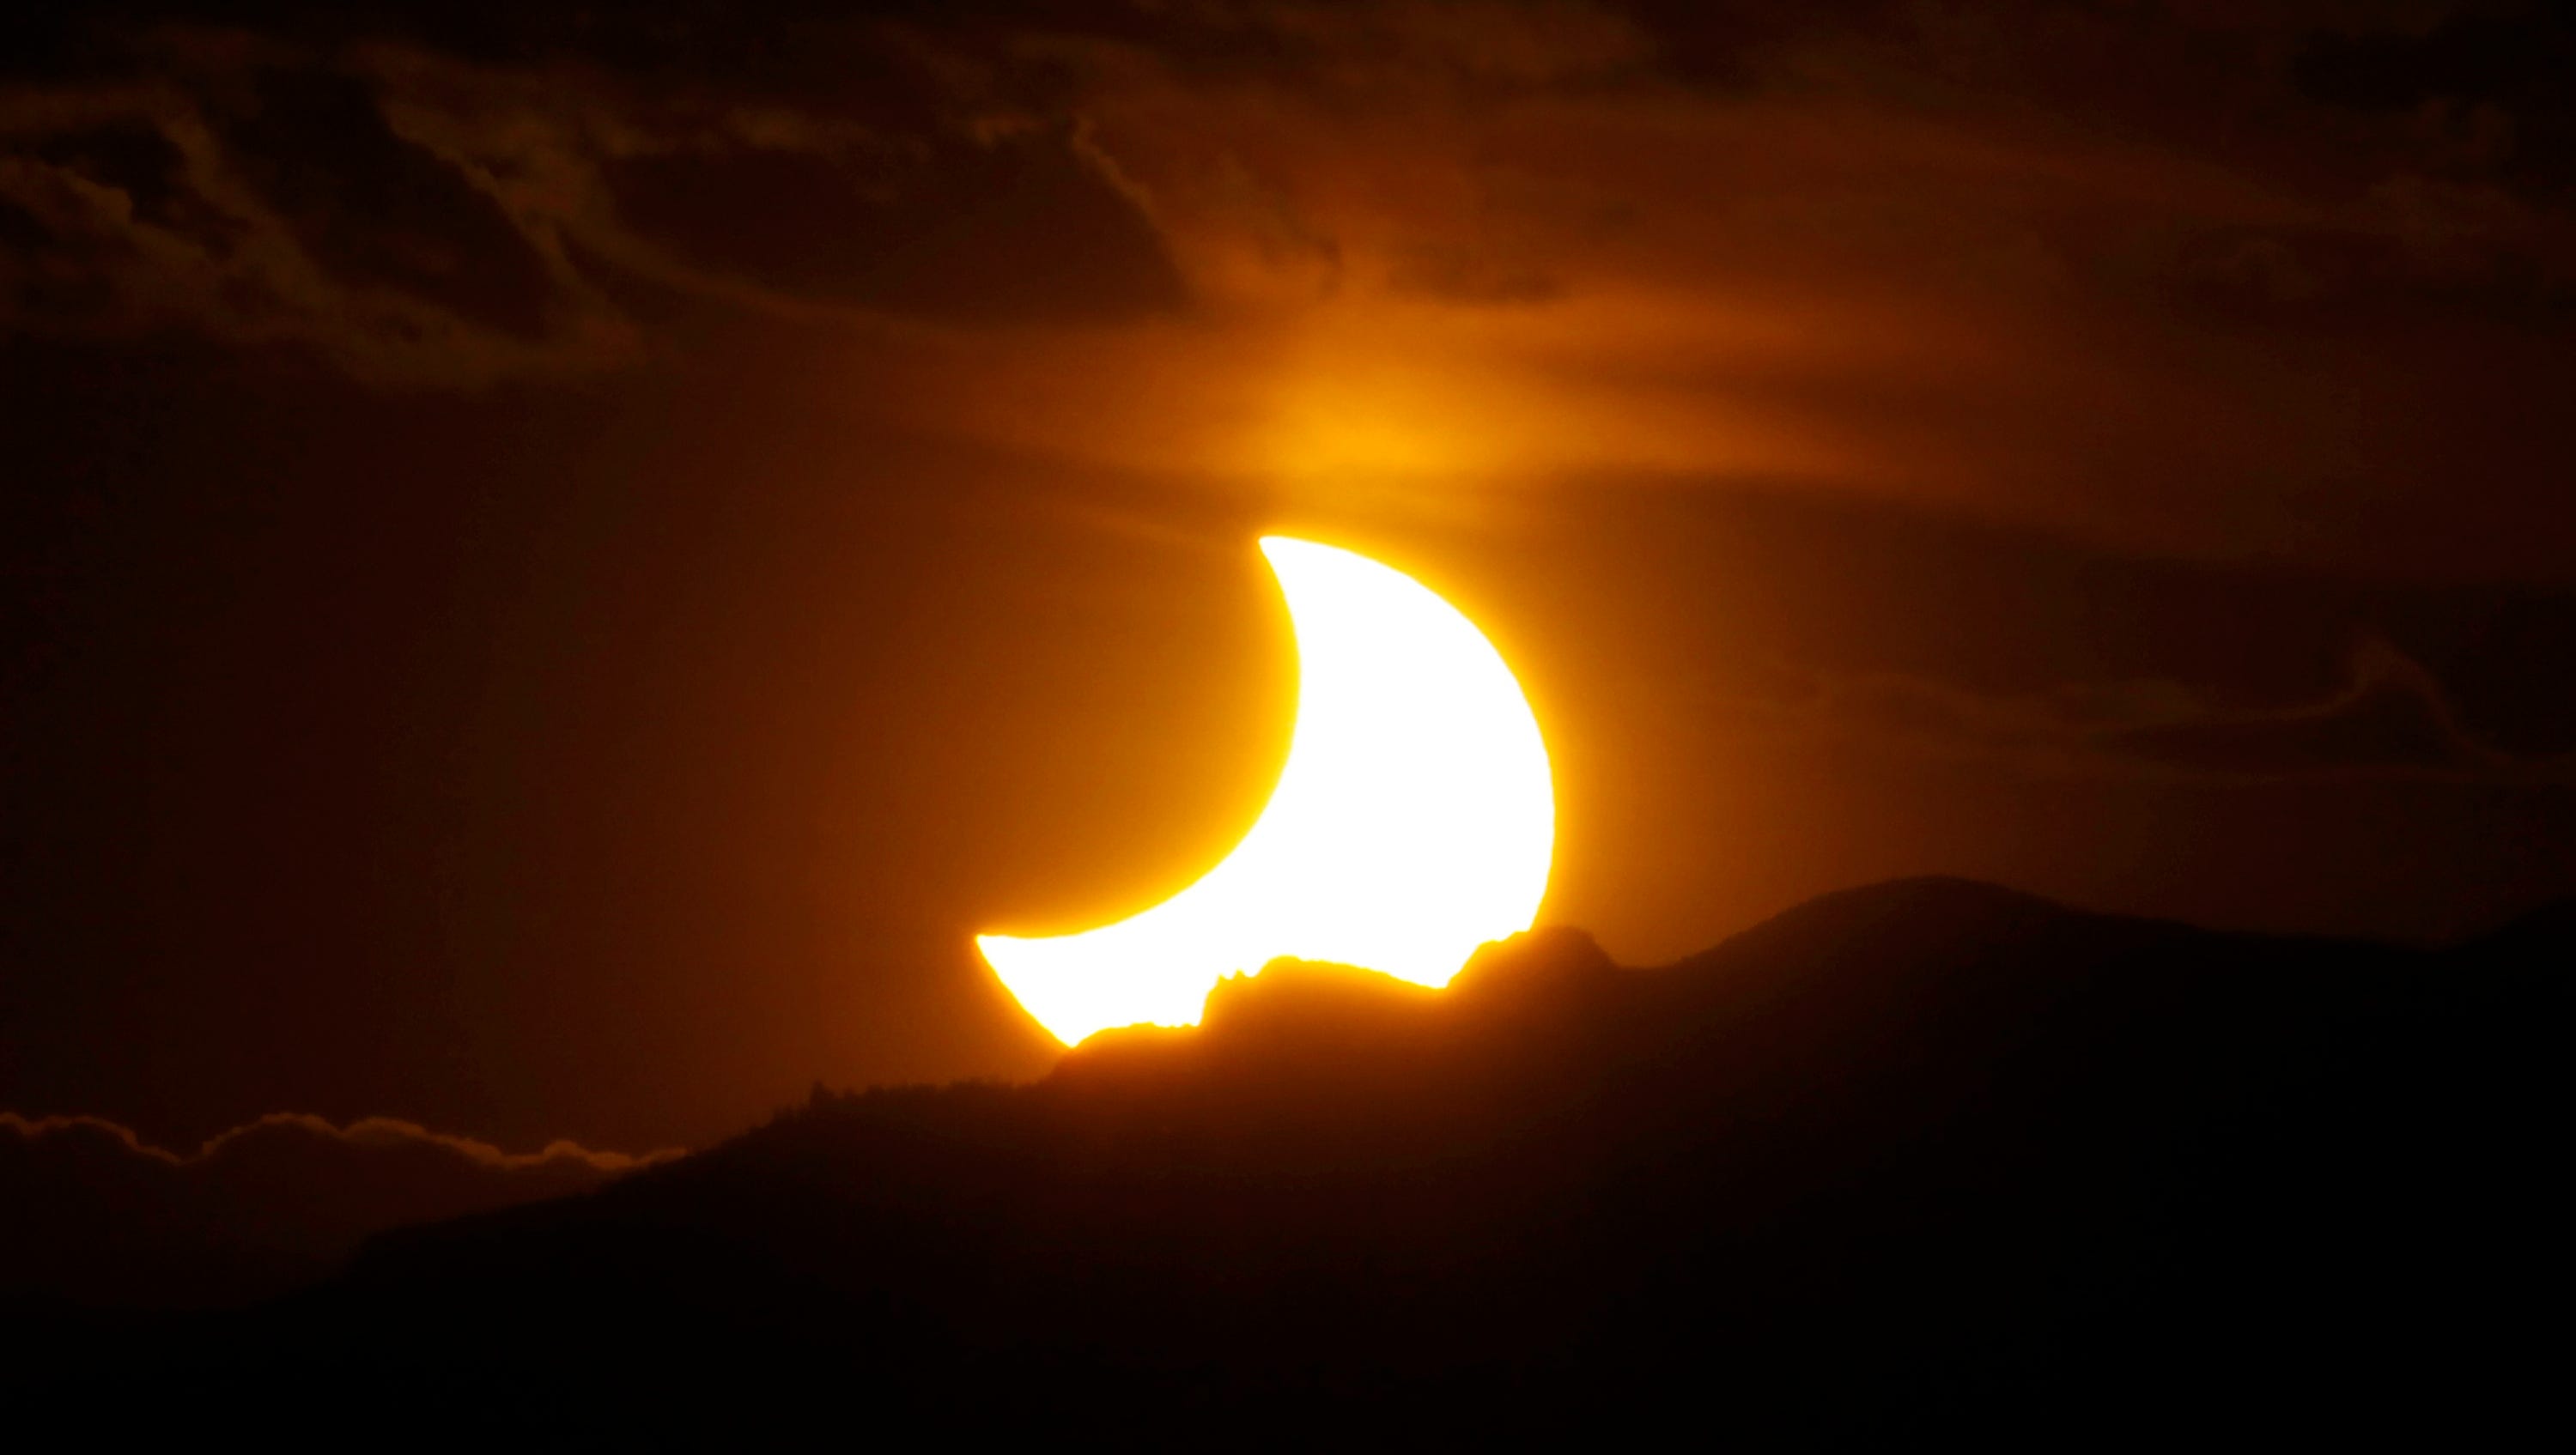 Solar eclipse 2017 Lodging still available across USA but act fast